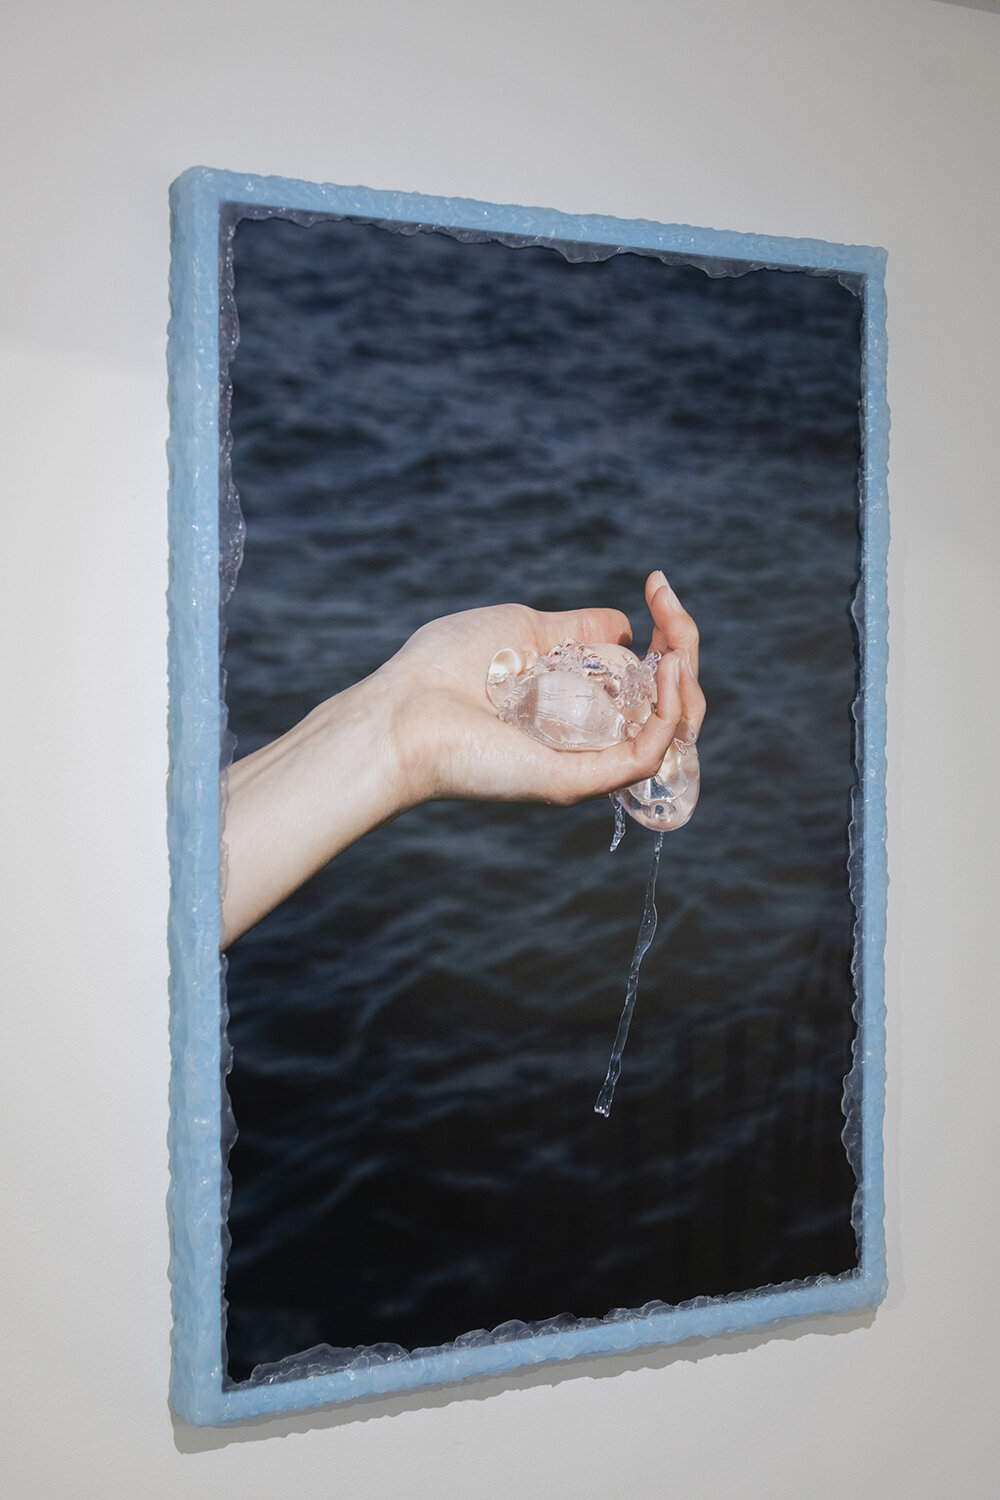 Kristina Õllek, Feeling With the Water Jelly, 2020